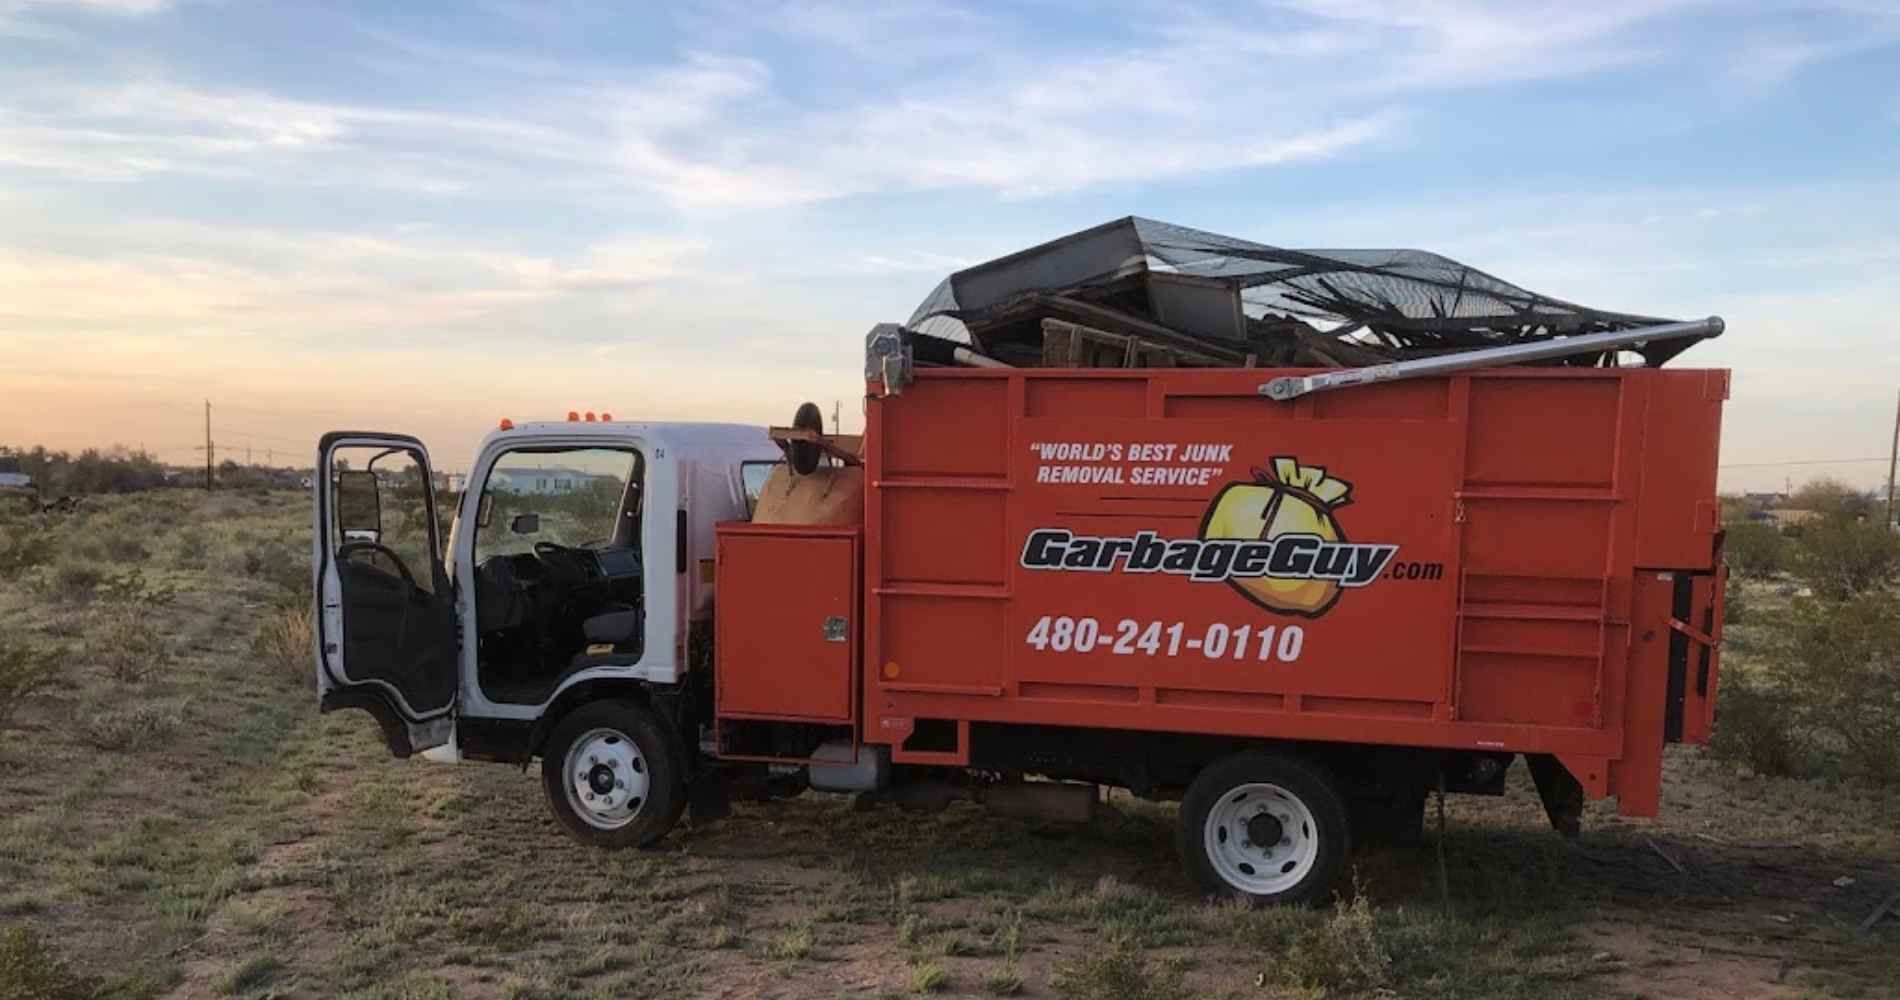 #1 for Junk Removal in Tempe, AZ with Over 1200 5-Star Reviews!